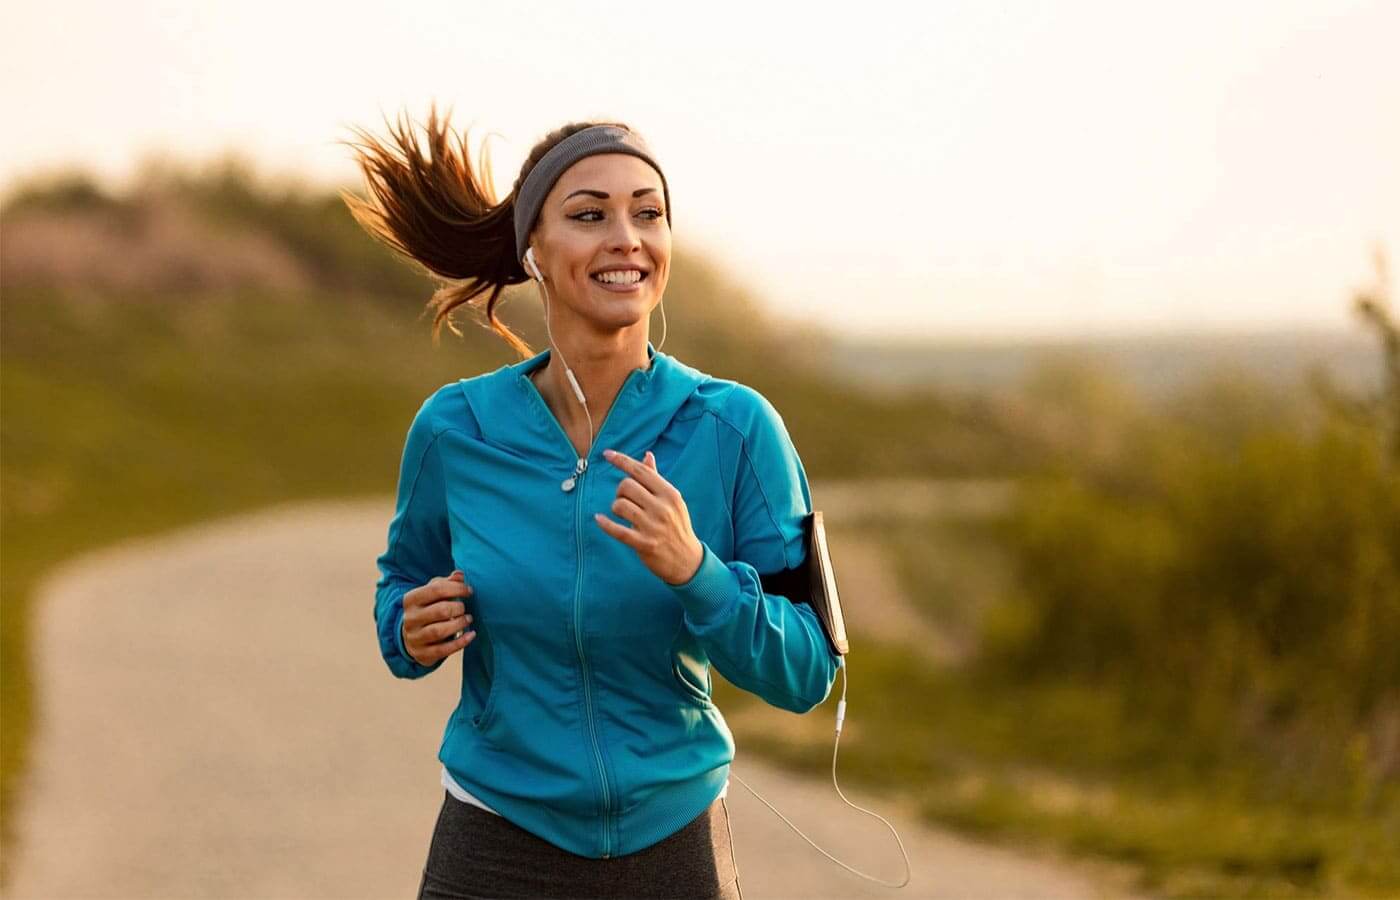 Young woman jogging along a road on a hill